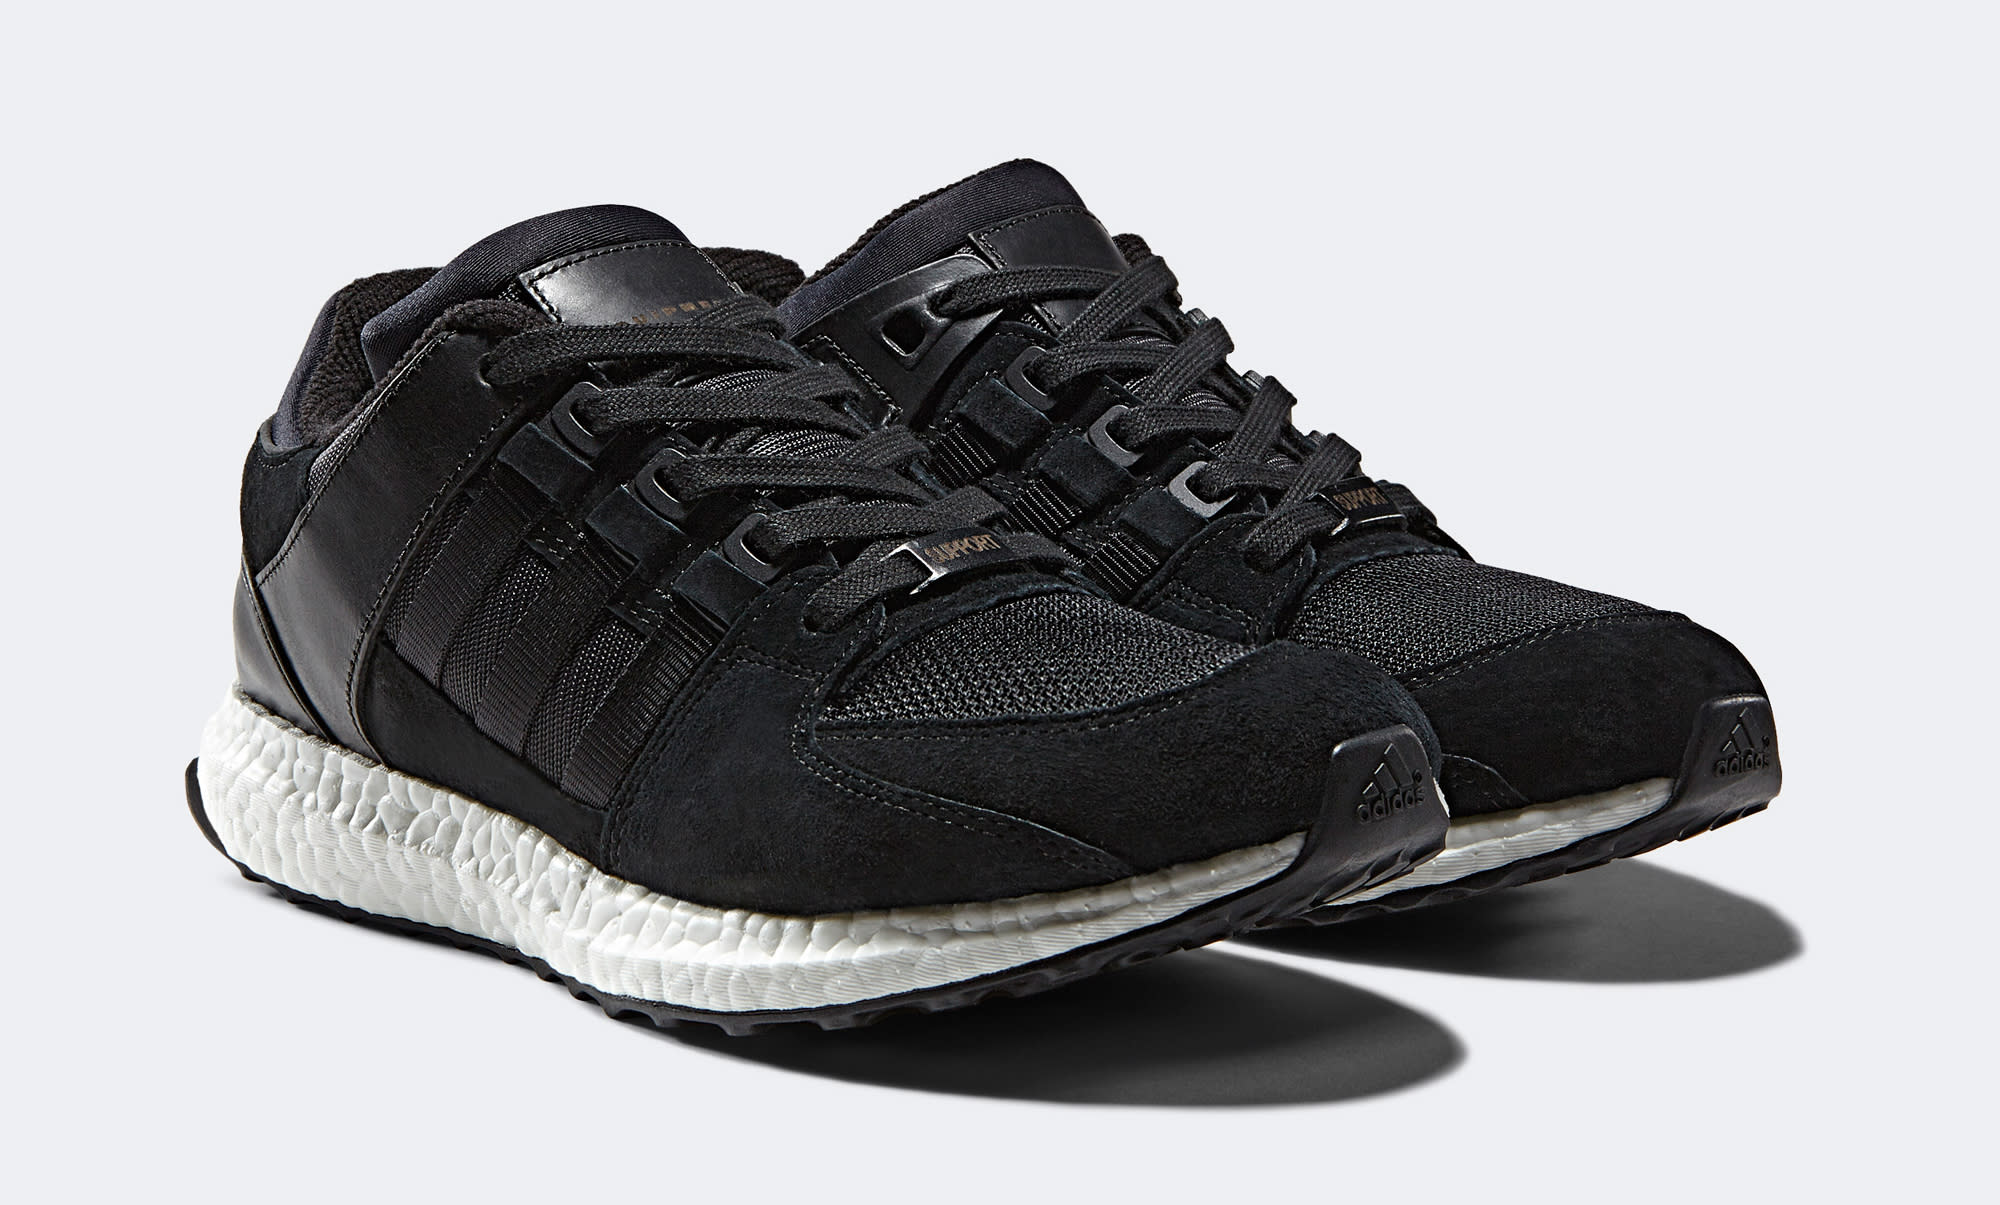 Adidas EQT Milled Leather Pack 7